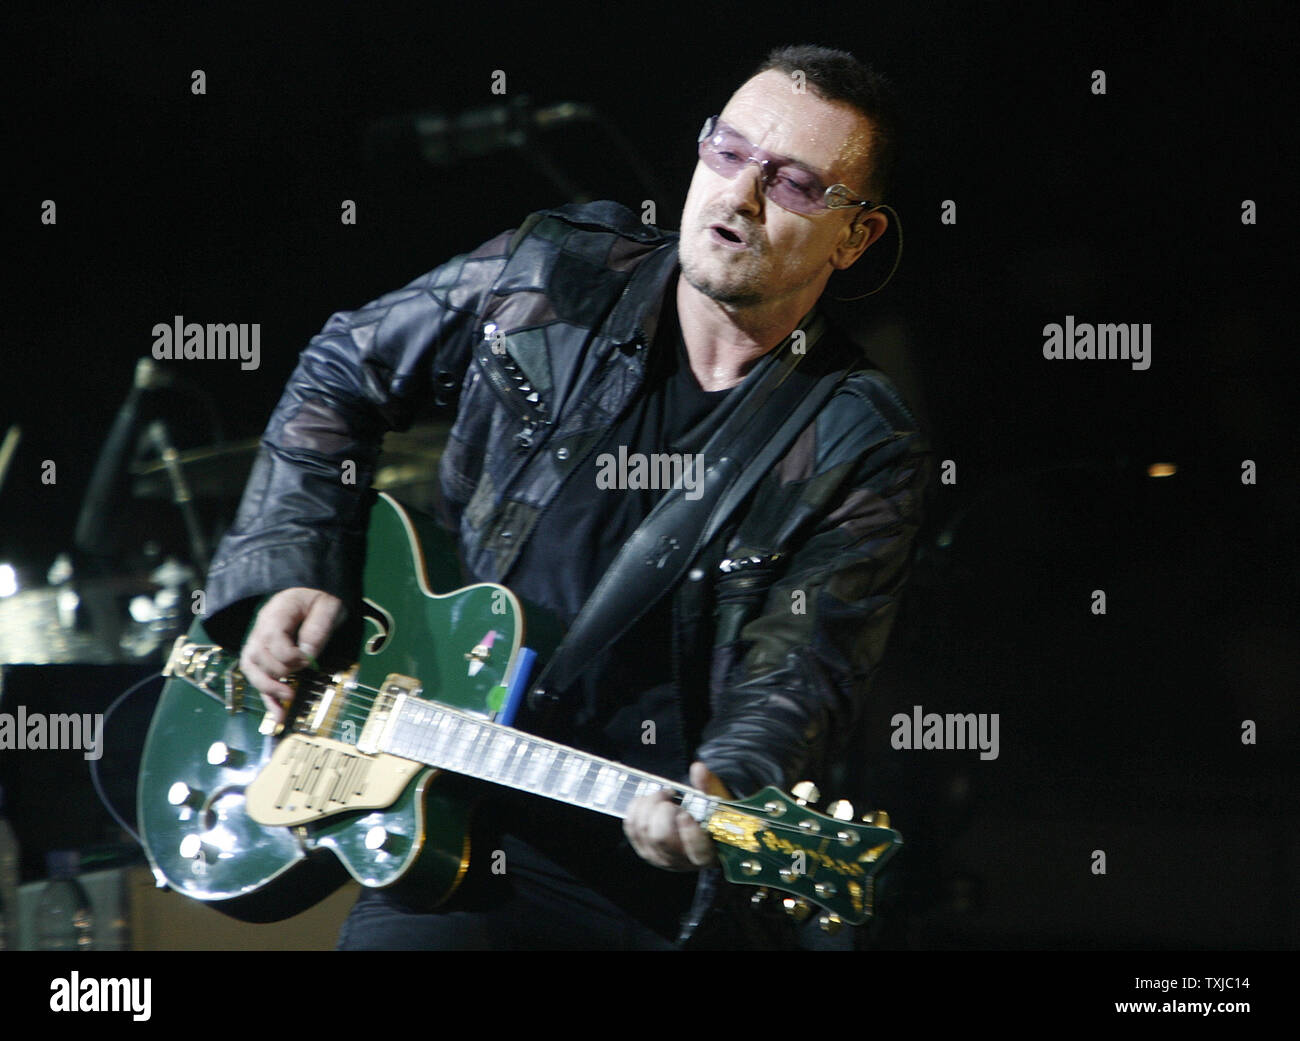 Bono of U2 performs during the first concert of their 360 Degree North American Tour at Soldier Field in Chicago on September 12, 2009.     UPI/Brian Kersey Stock Photo